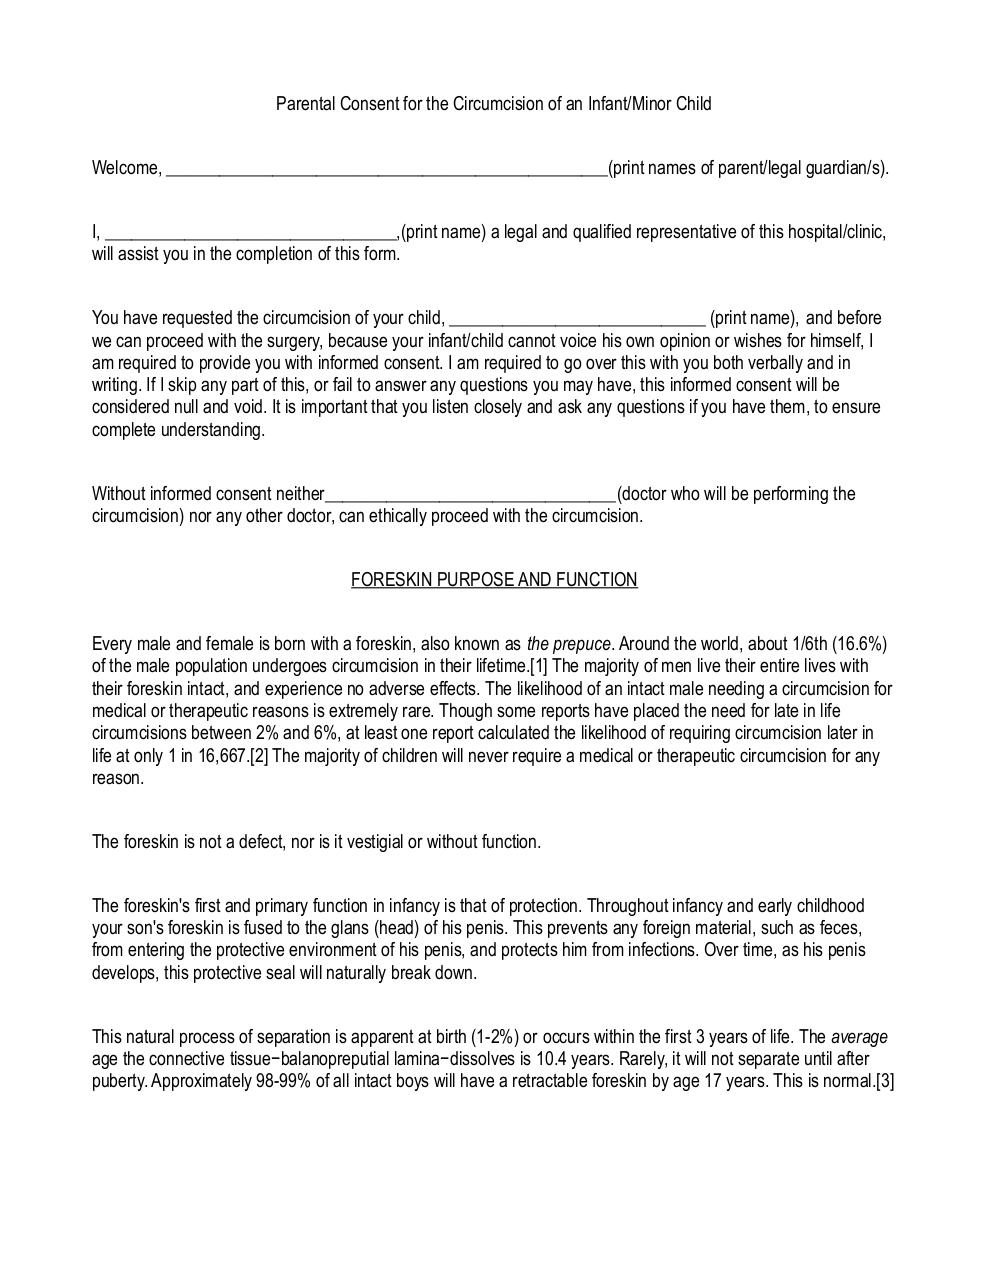 InformedConsent-WithAnnotations-JTK-Draft03.pdf - page 1/23